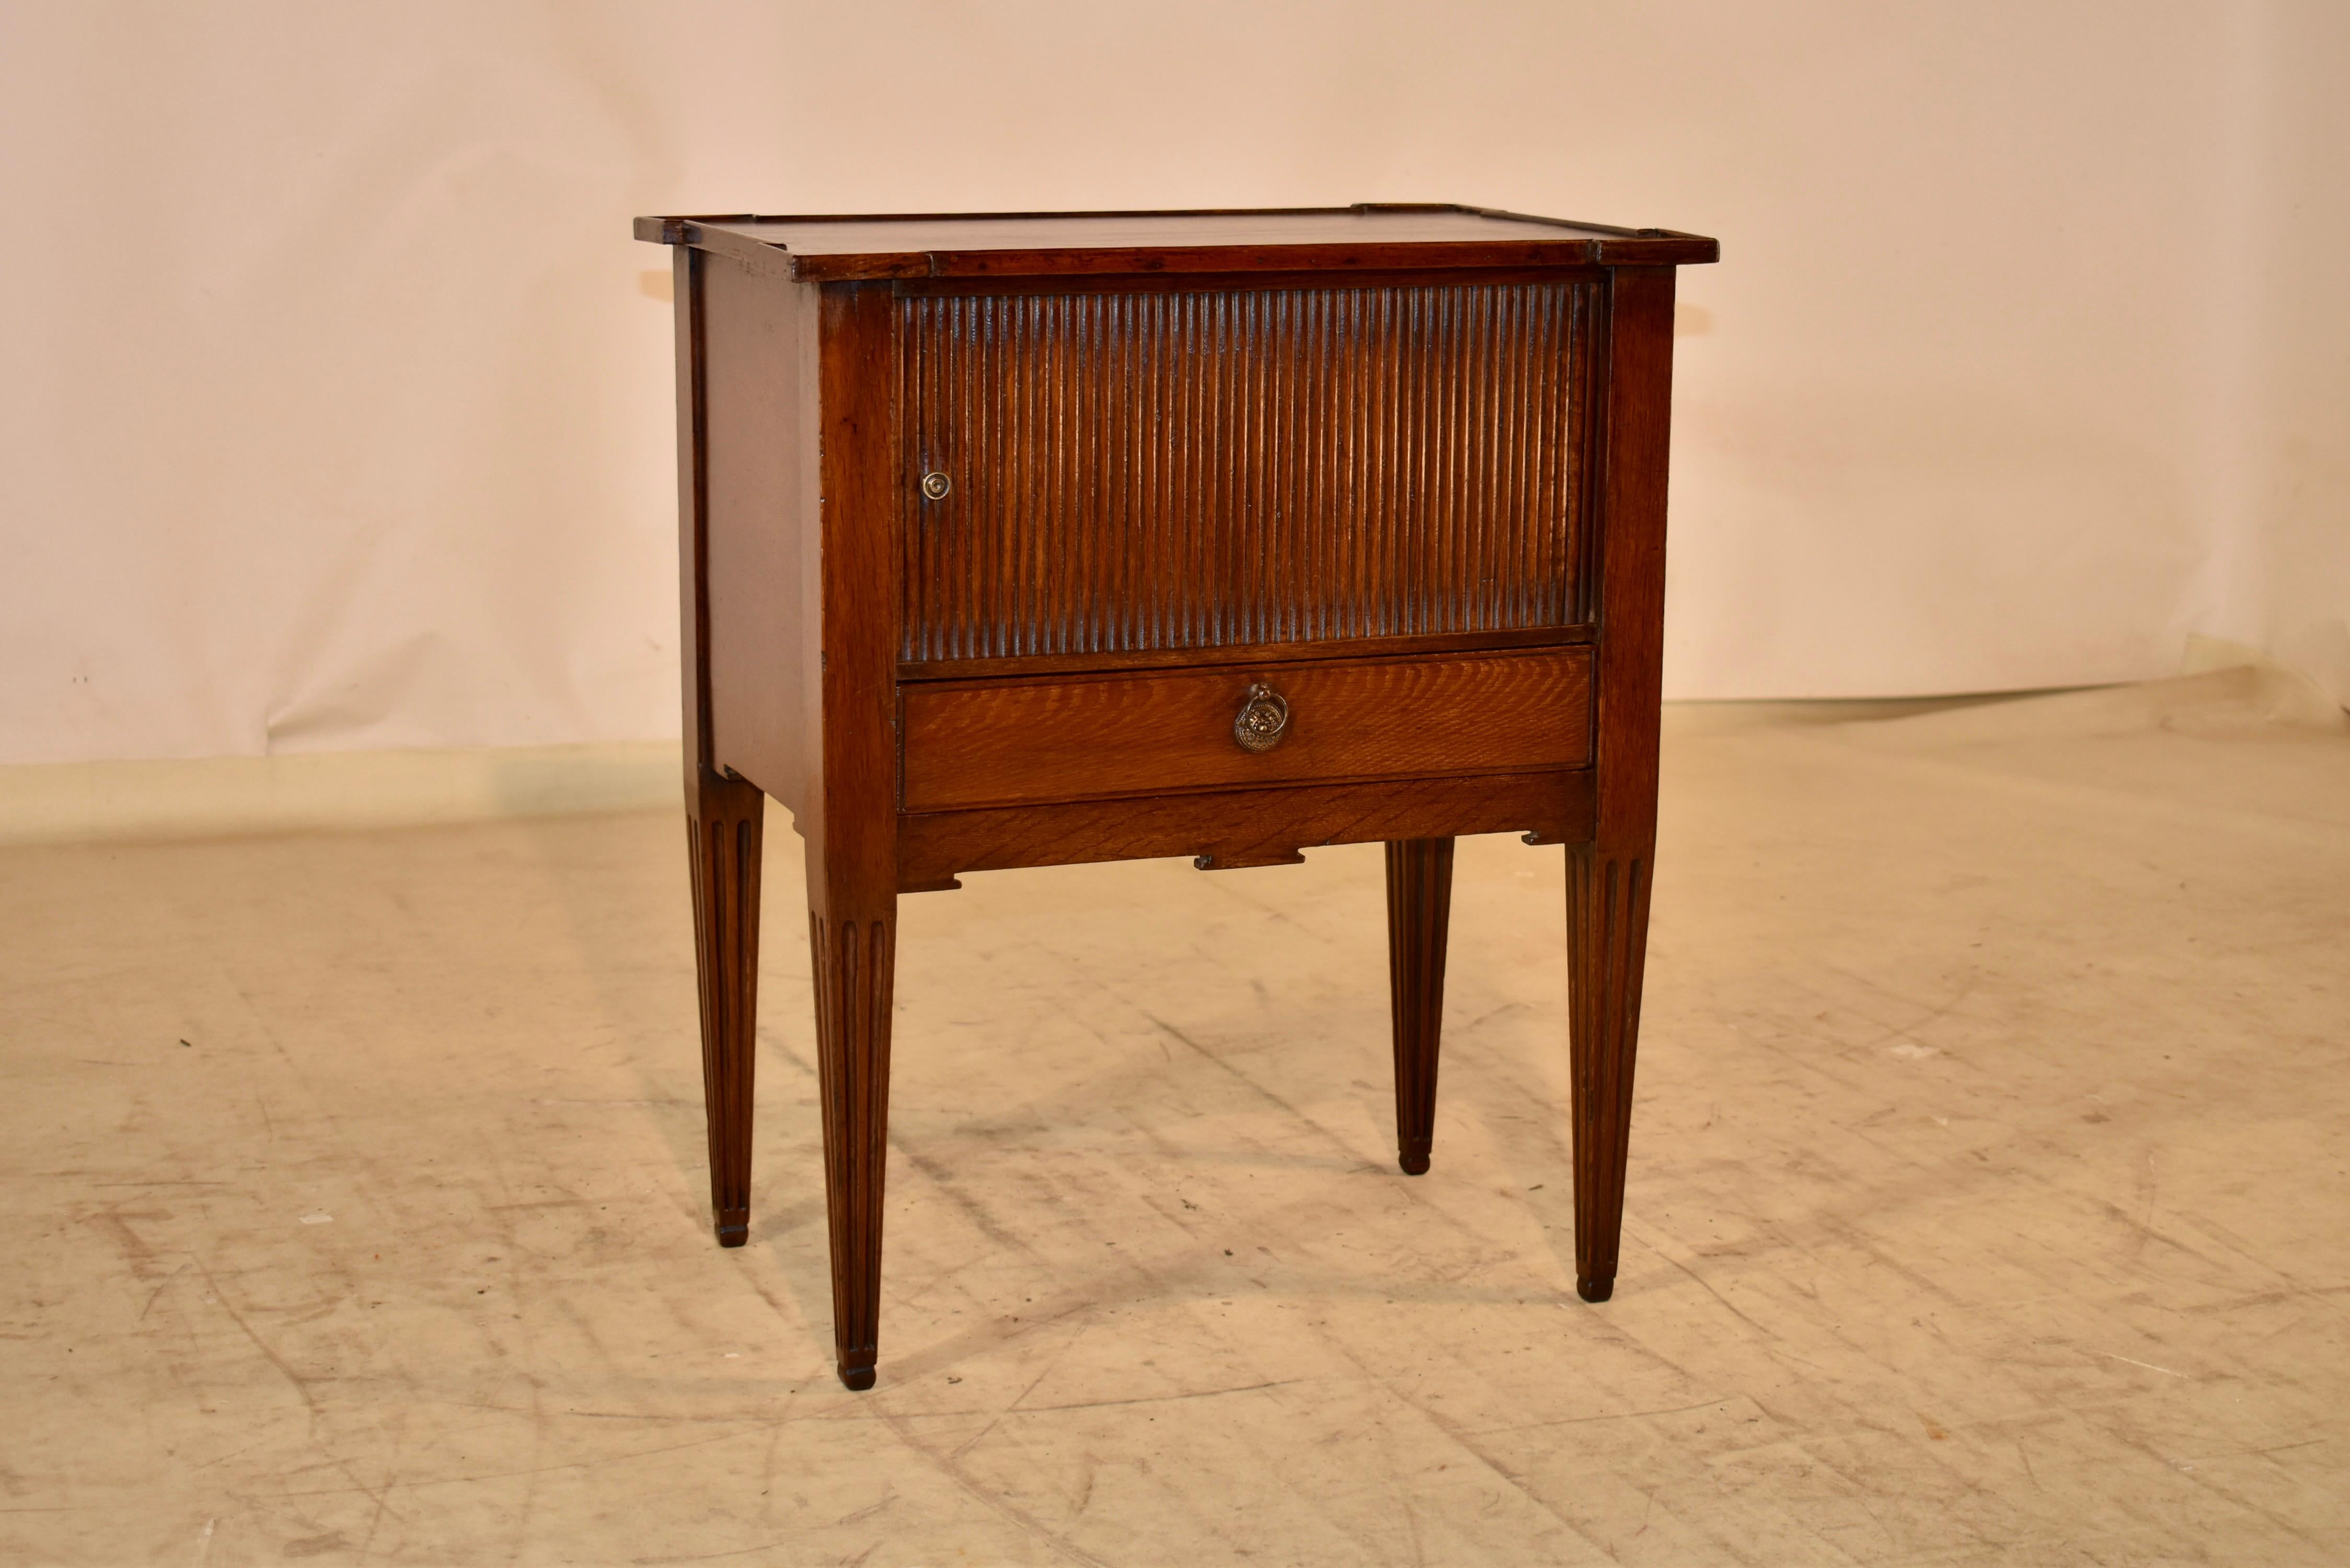 Early and rare early 19th century Georgian bedside cupboard made from mahogany. The top is banded along the edges, for a slight gallery effect around the shaped top, which adds a lot of pizazz to the overall shape of the piece.  The top follows down